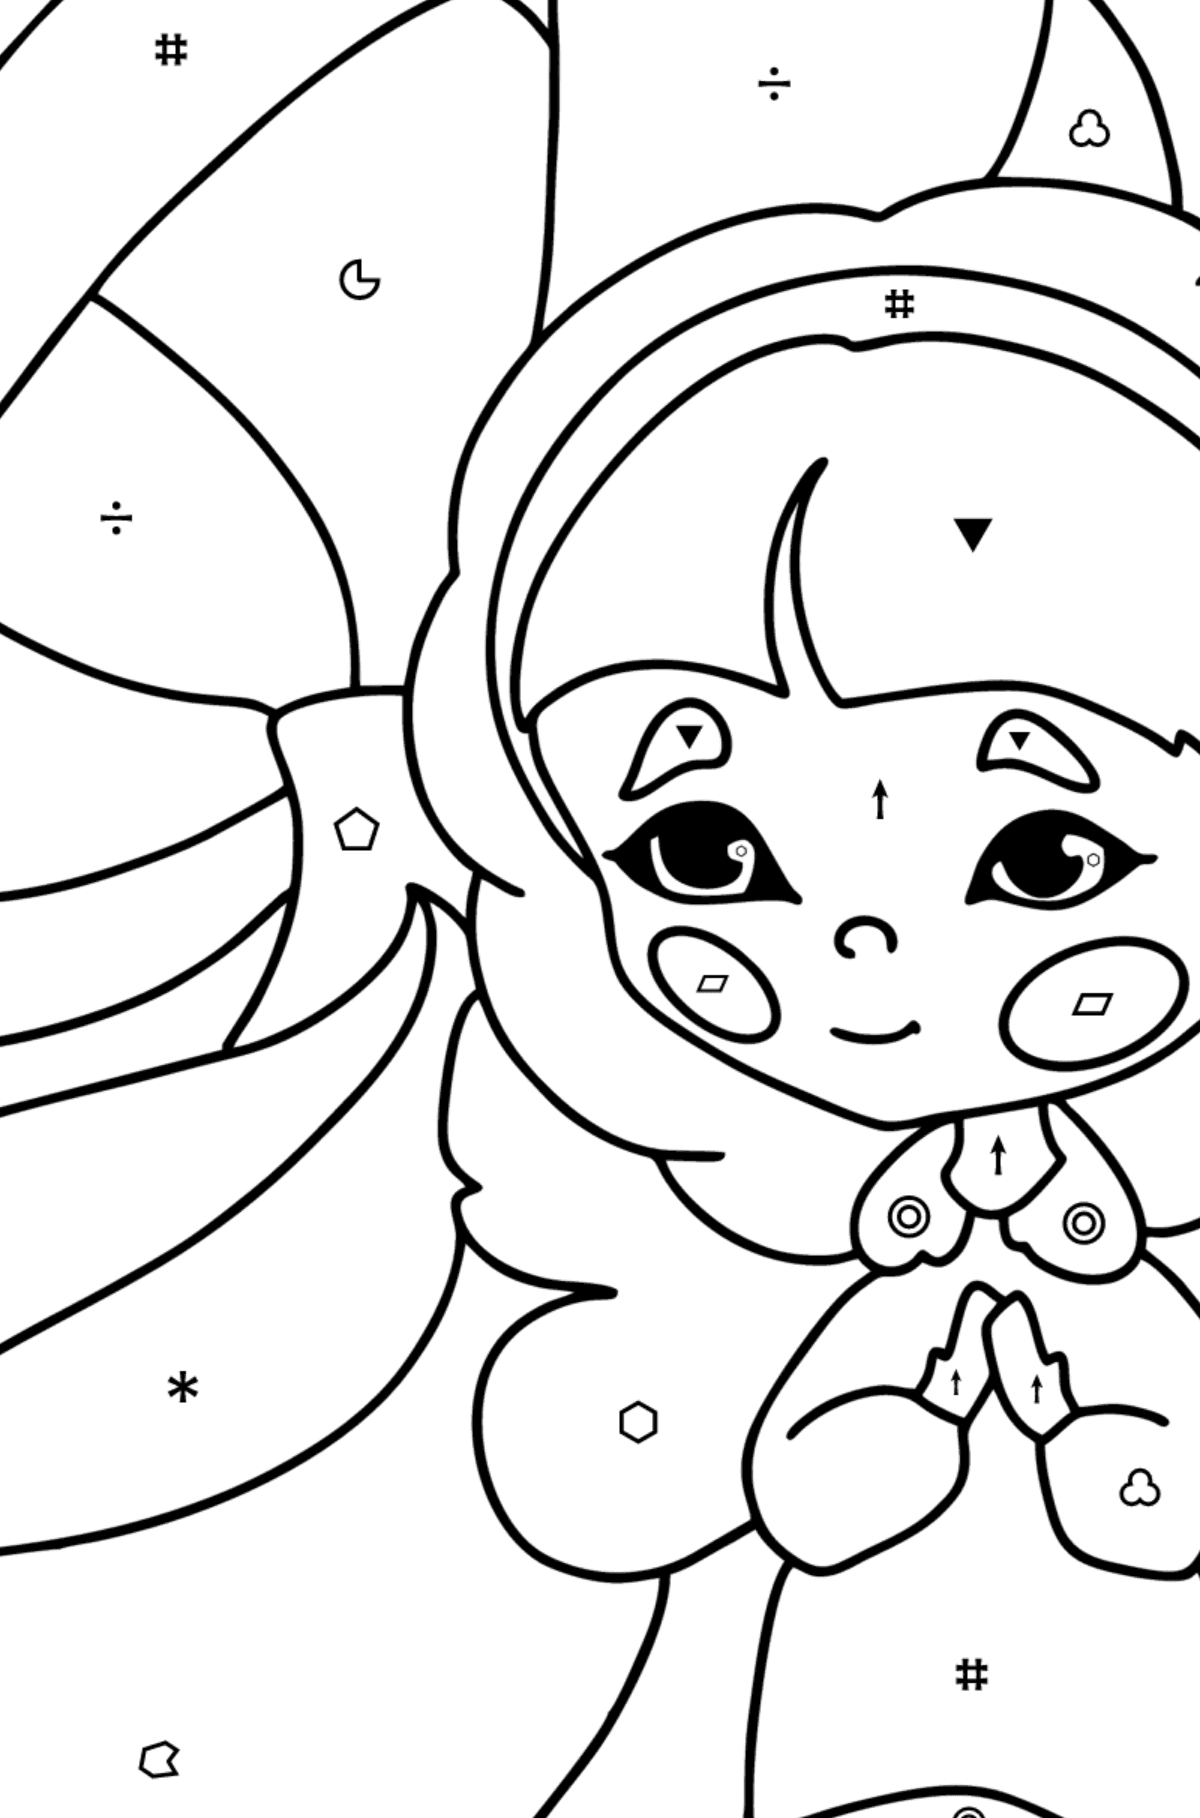 fairy and mushroom coloring page - Coloring by Symbols and Geometric Shapes for Kids